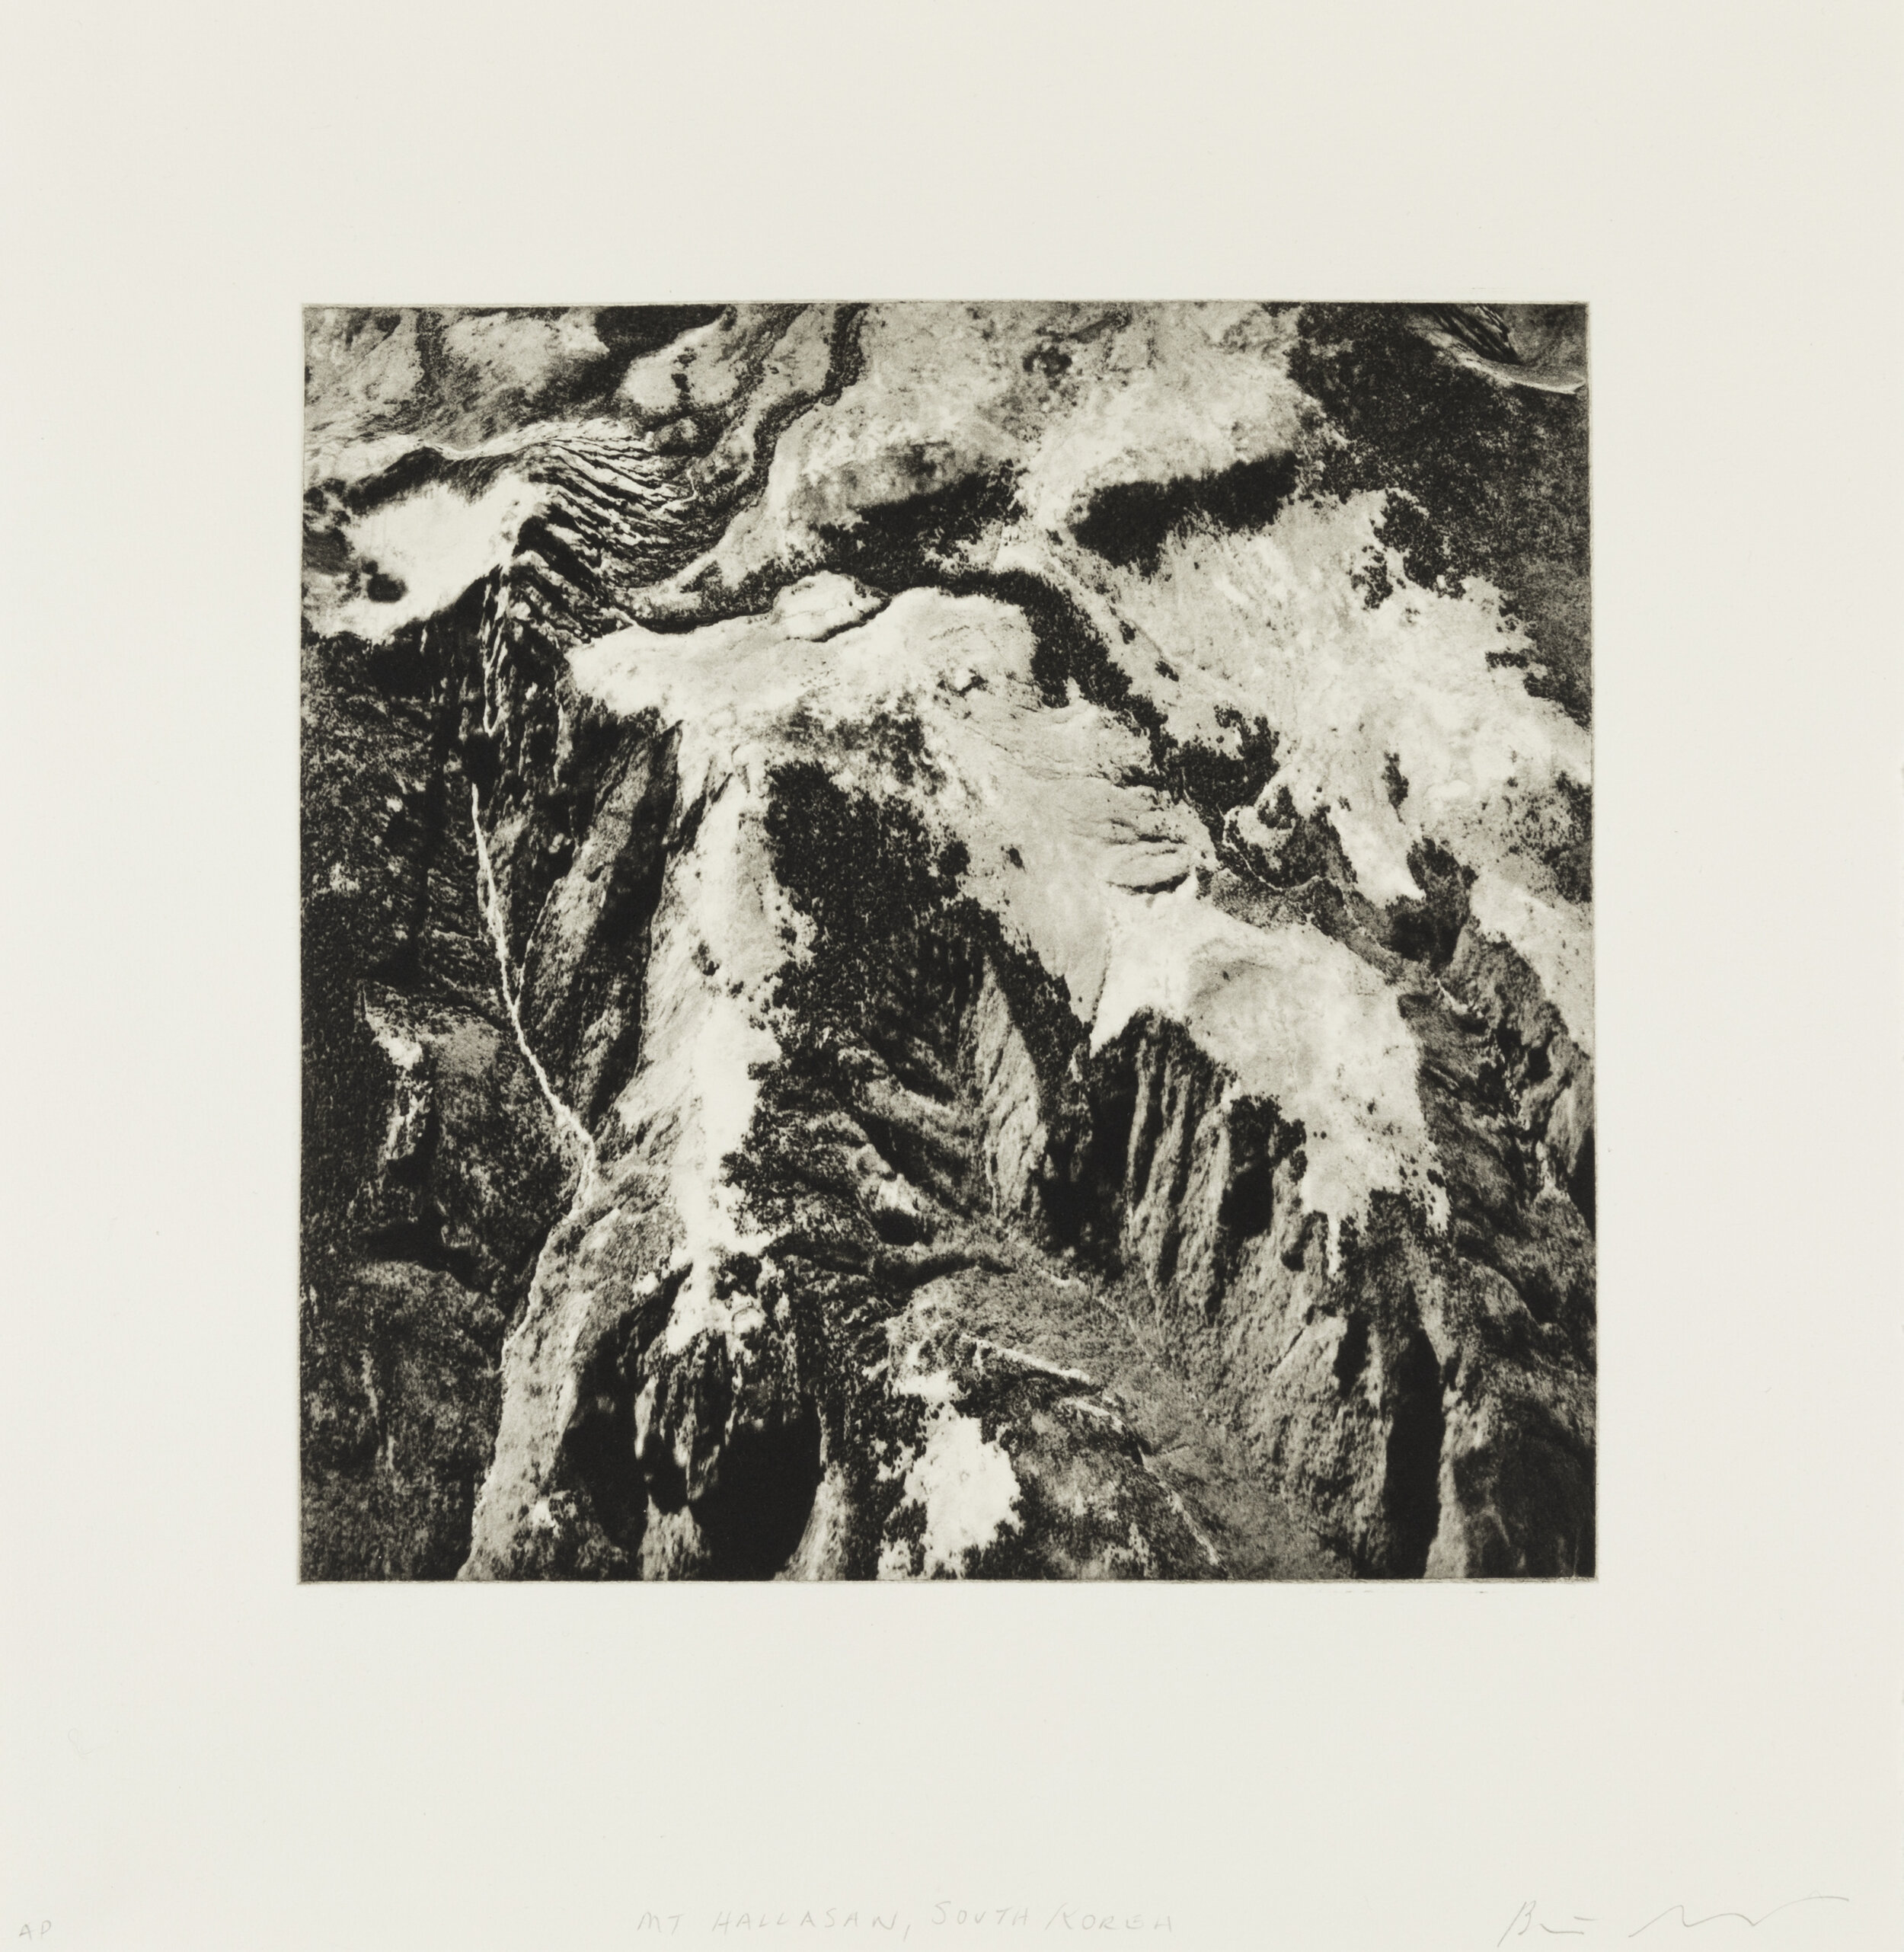    Mount Hallasan, South Korea, 2020    Copperplate photogravure etching on cotton rag paper, plate size; 10.6 x 10.6, paper size; 16 x 15.5, edition 10  